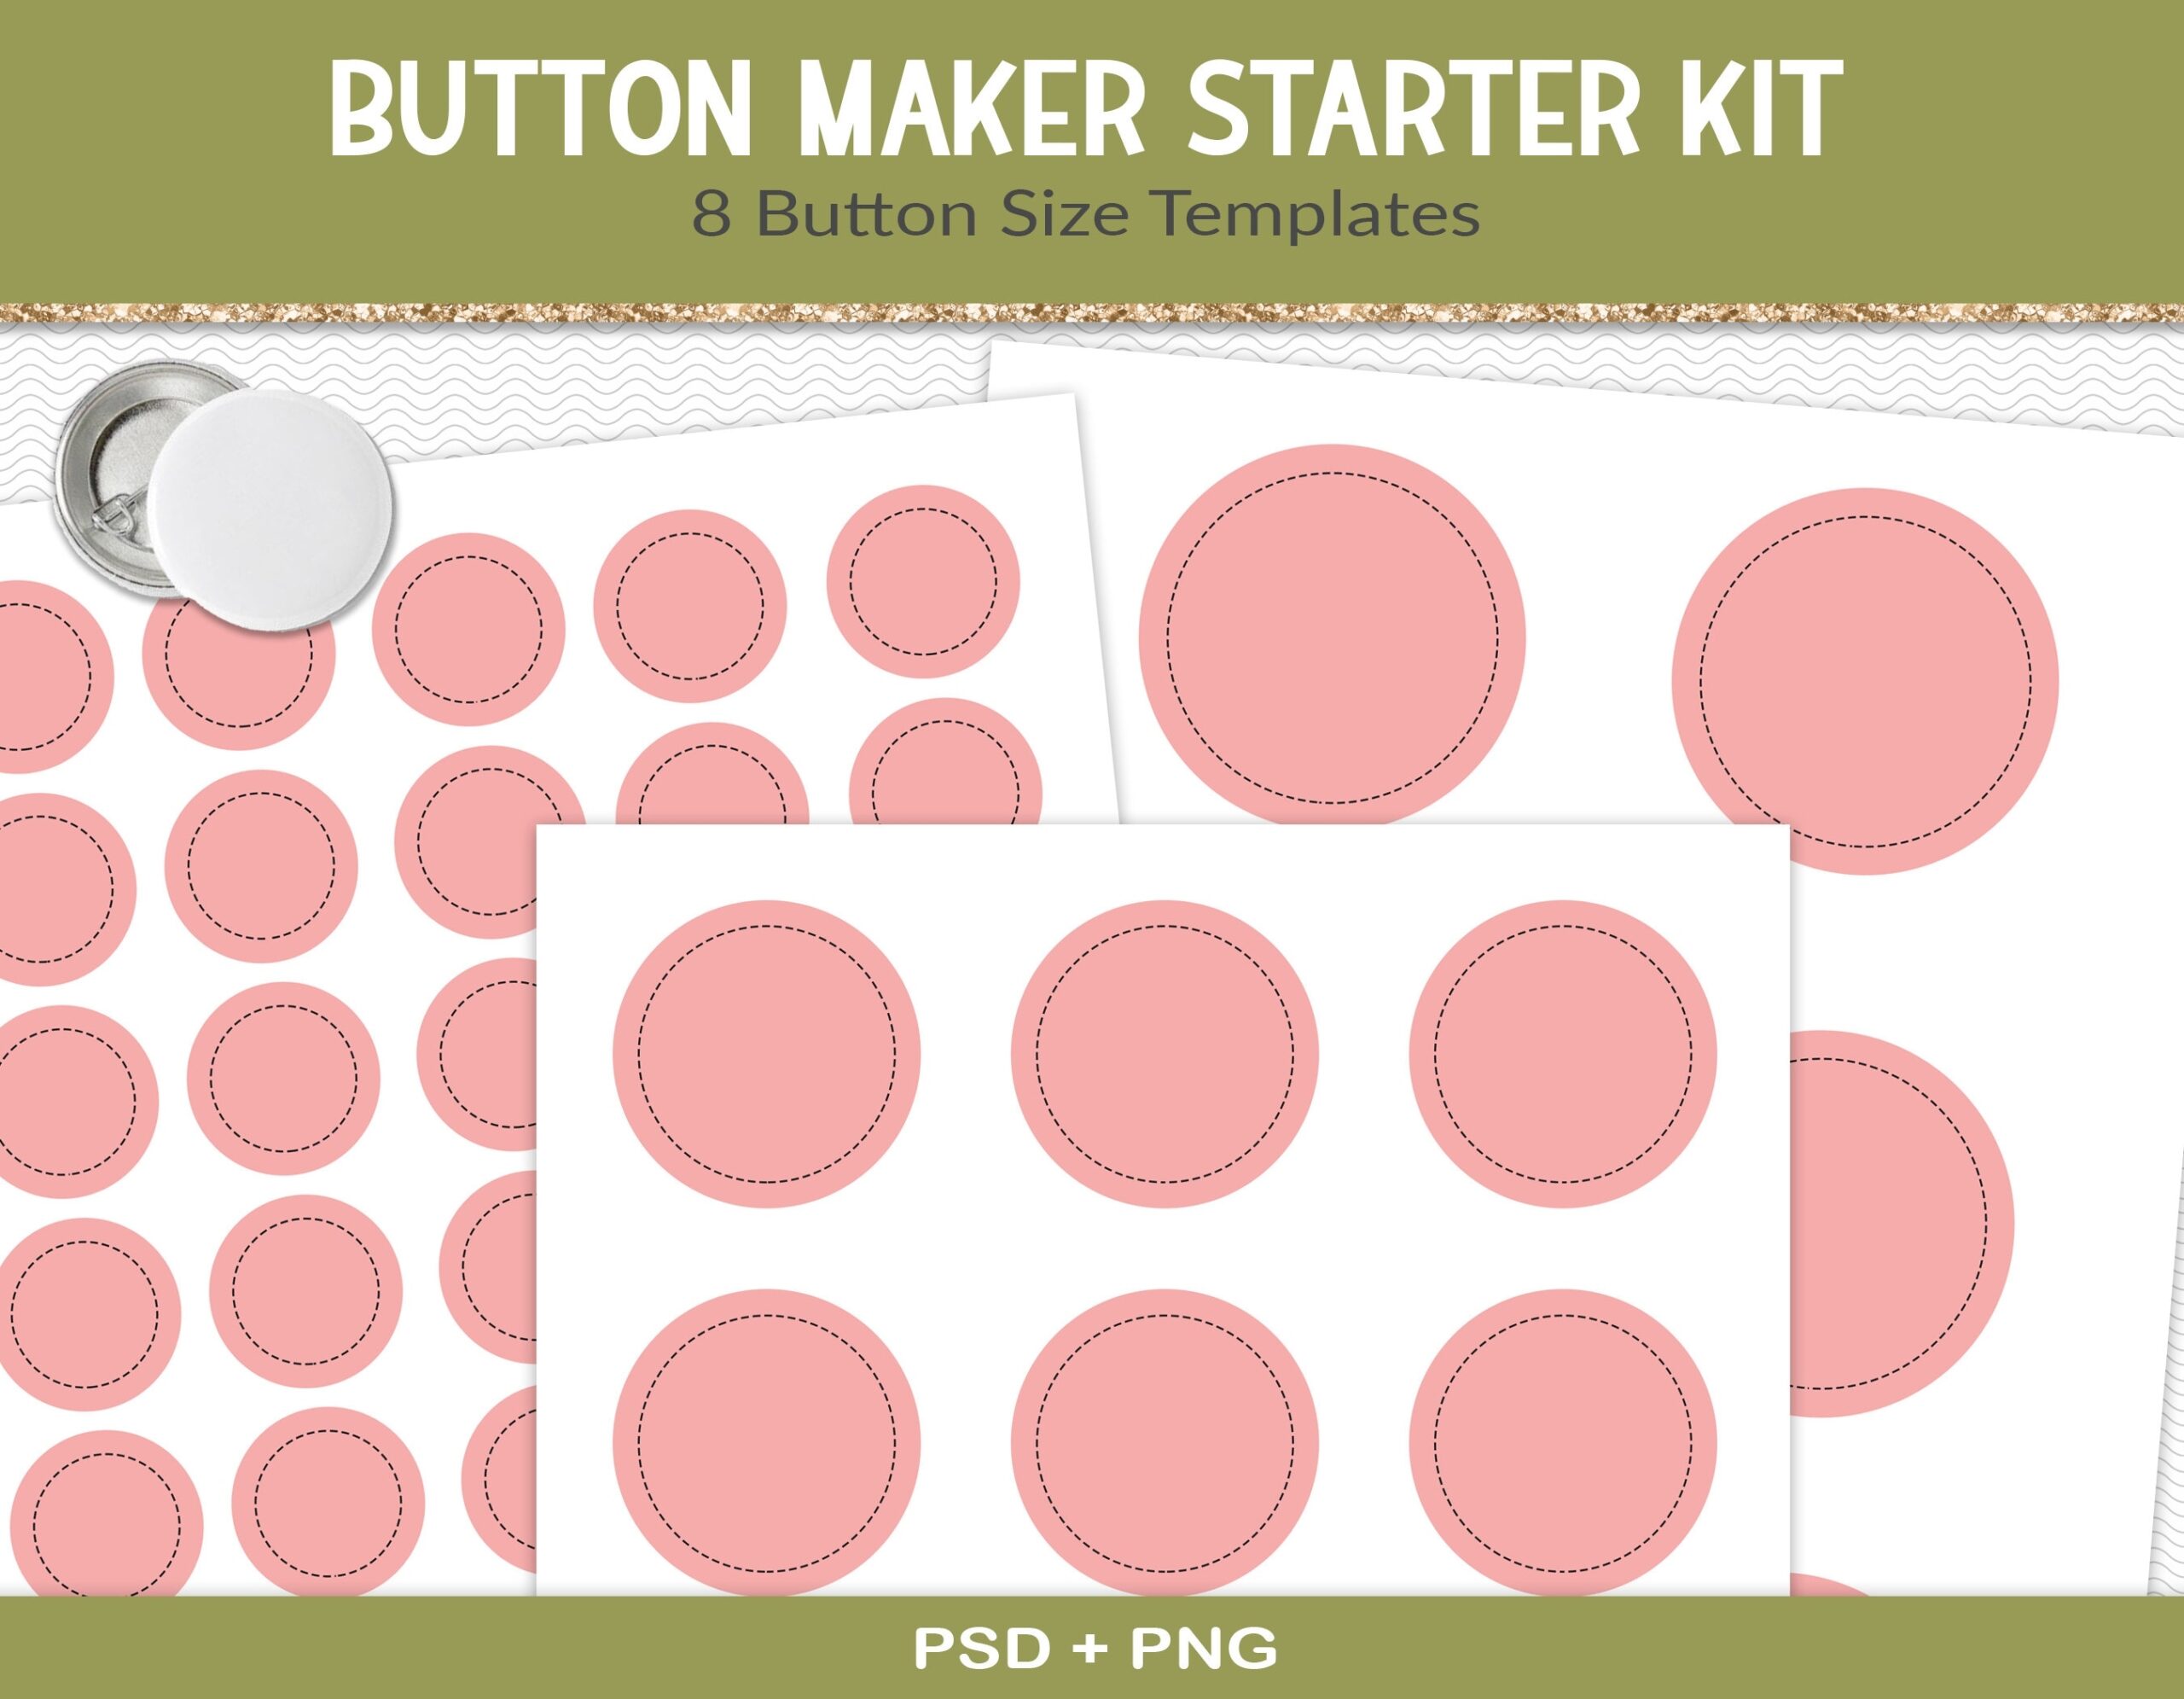 Button Template Bundle Pinback Buttons Layered PSD With Wrap Edge For Button Making Button Maker Craft Printable PSD PNG BD02 Etsy - Free Printable Button Templates